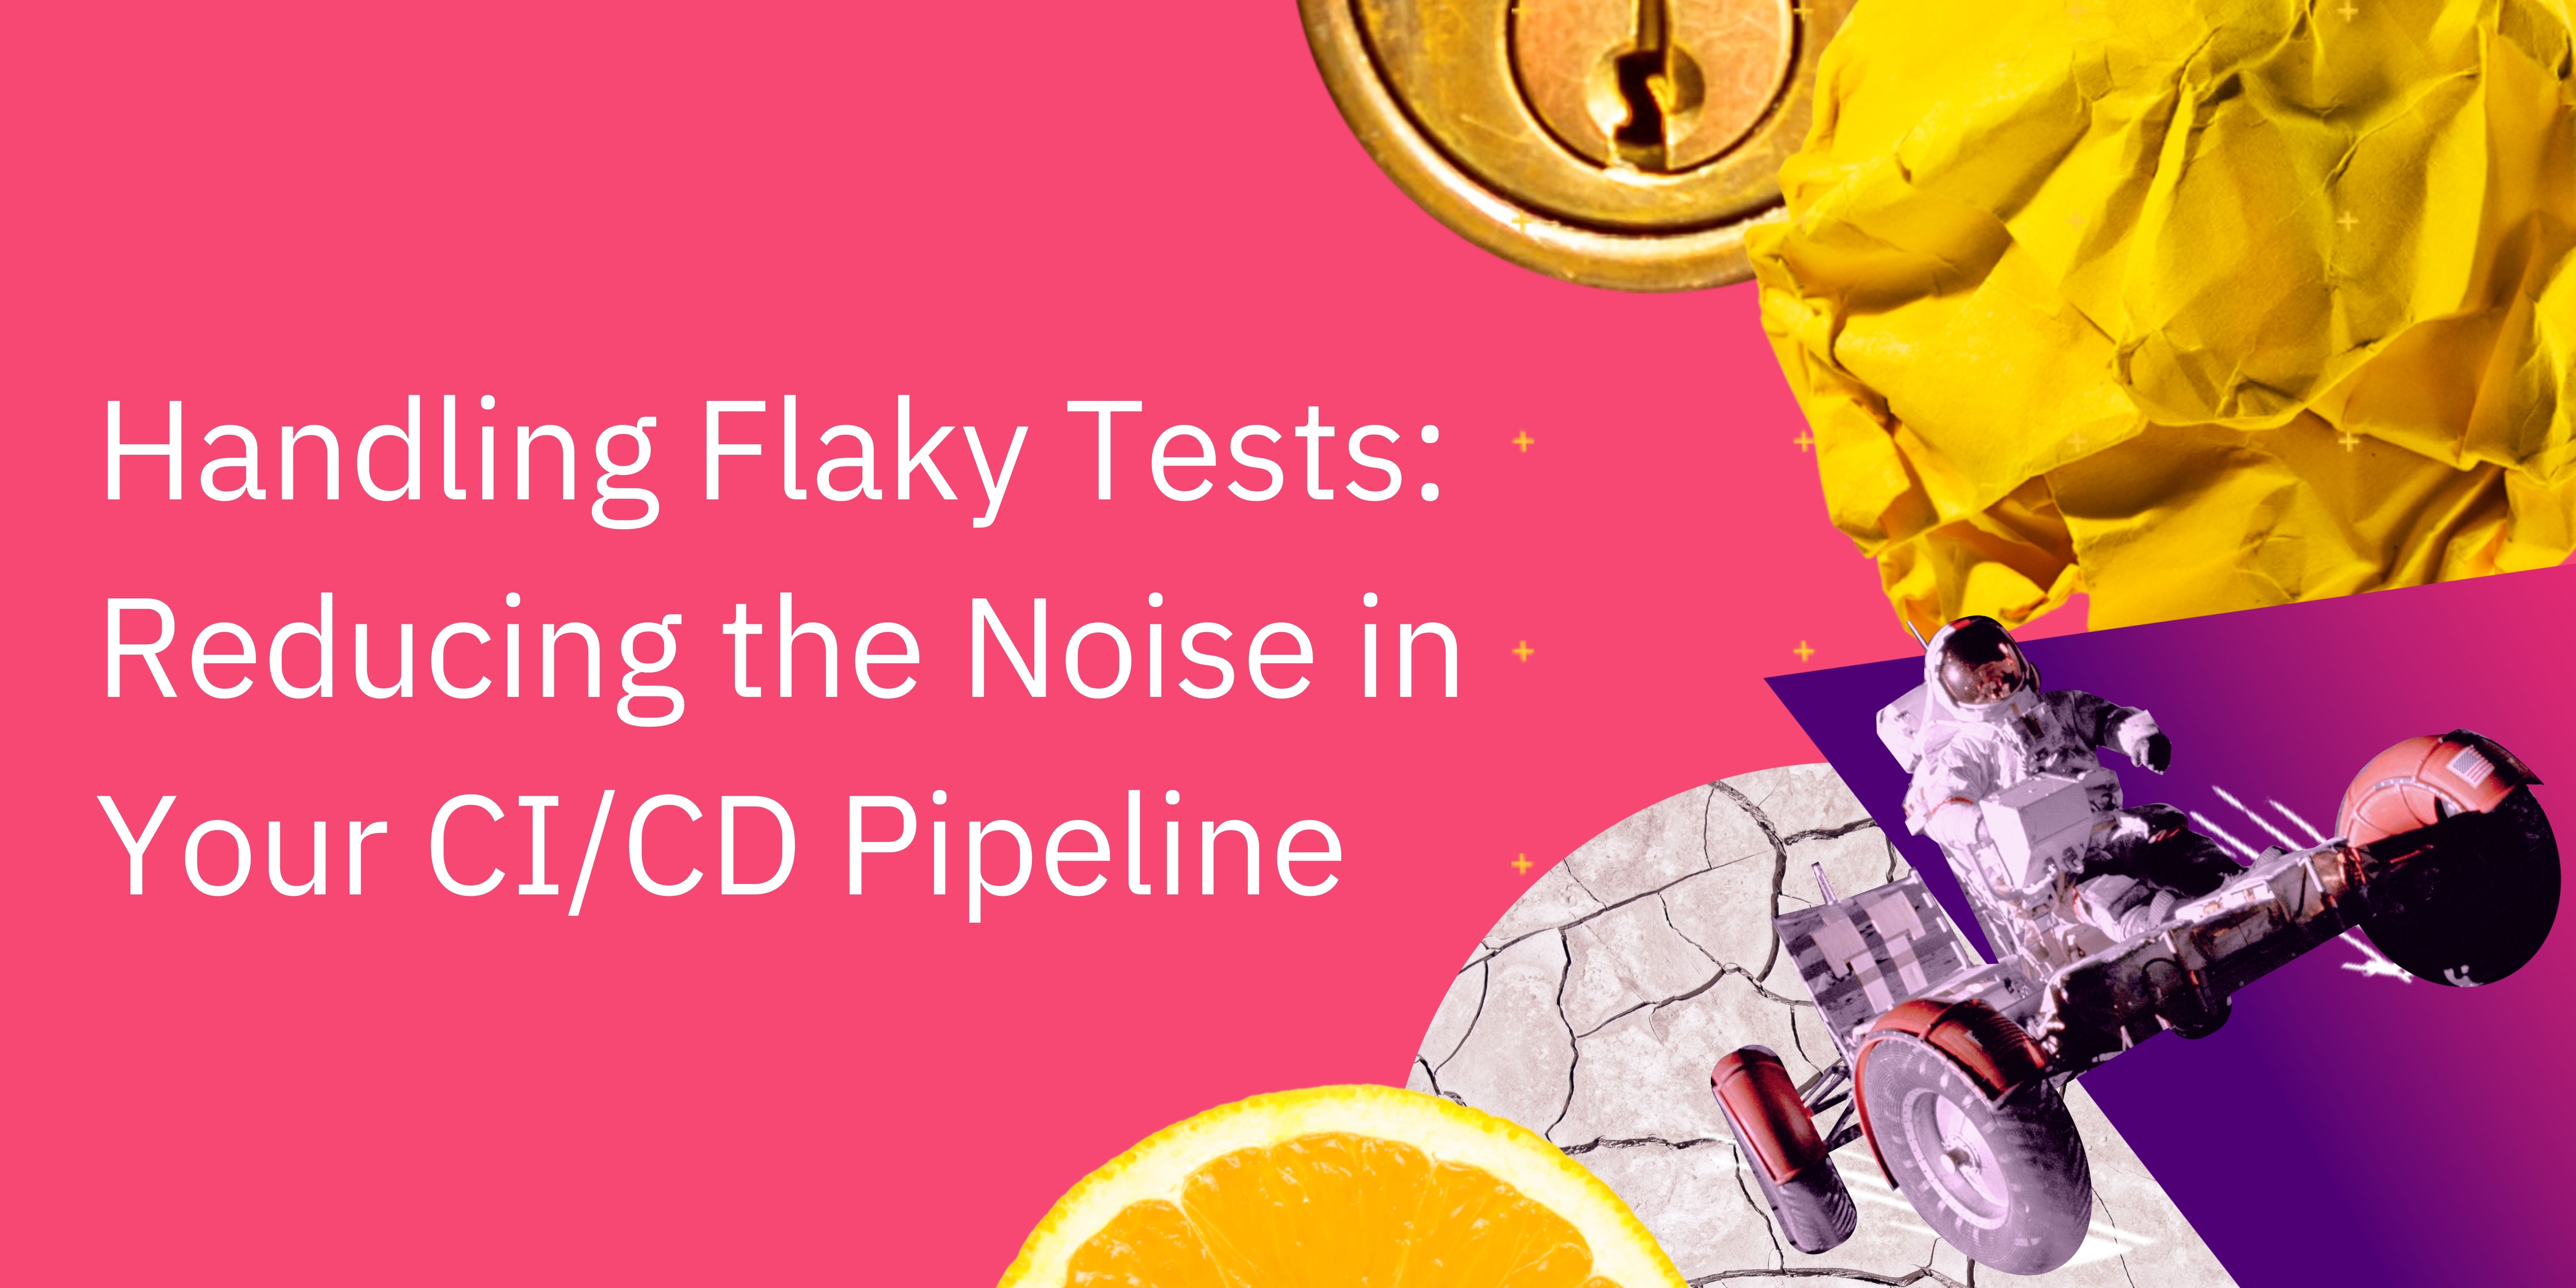 Handling Flaky Tests: Reducing the Noise in Your CI/CD Pipeline